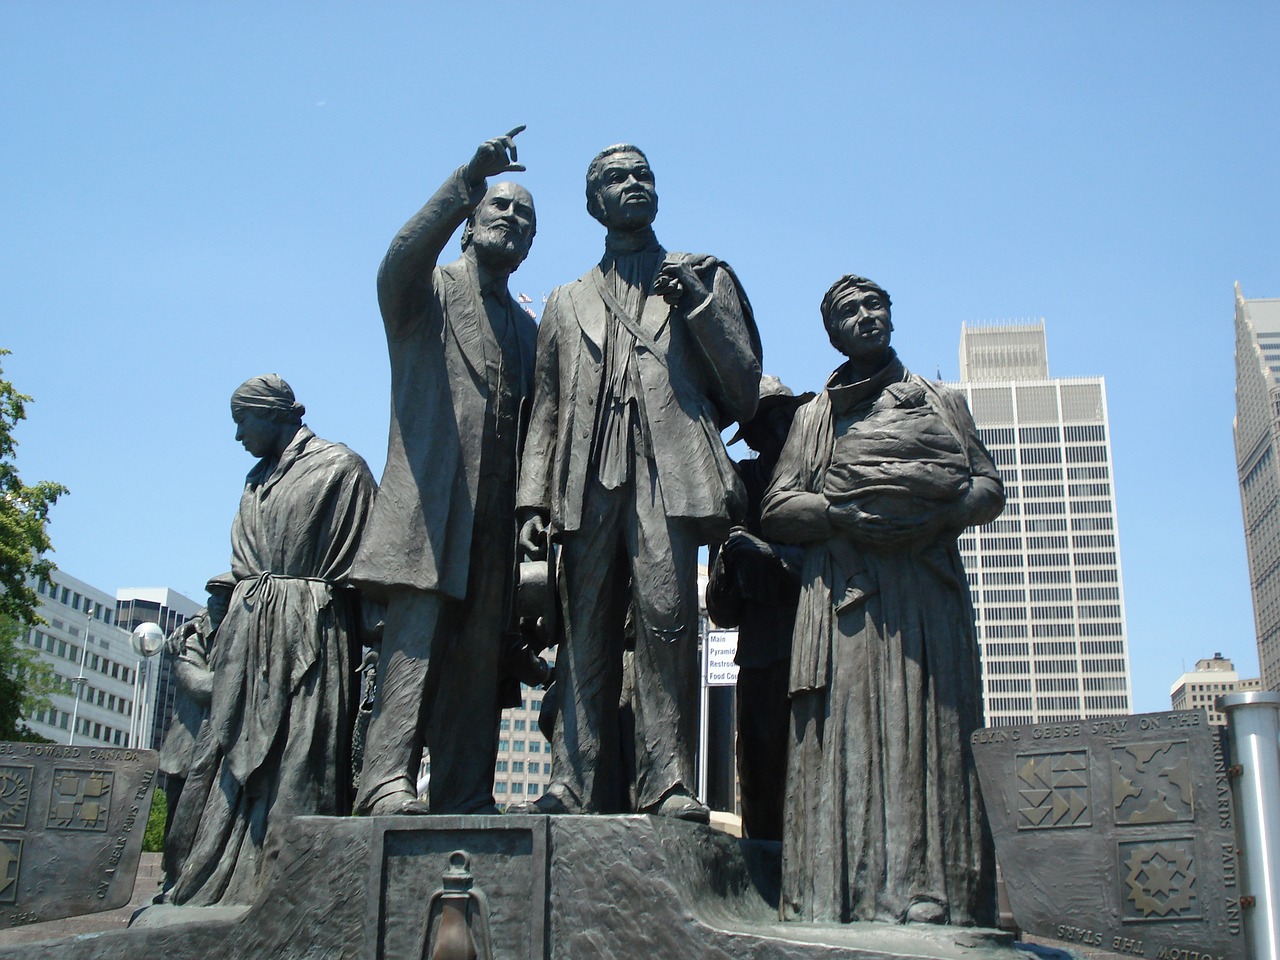 This mural honors the underground railroad. The figures are facing Ontario, Canada from the Detroit Riverwalk.